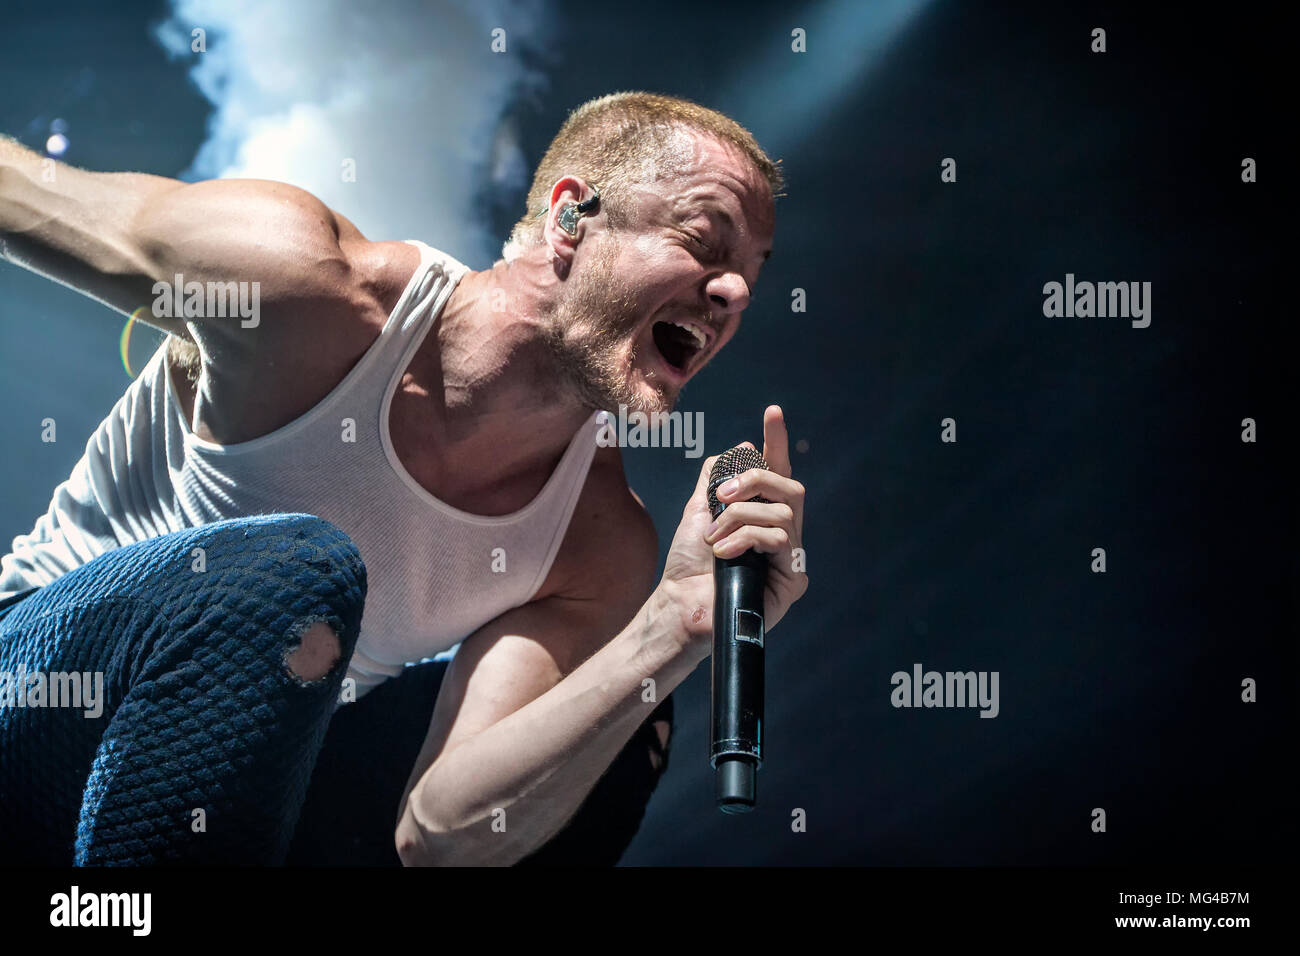 Norway, Oslo - April 25, 2018. The American rock band Imagine Dragons performs a live concert at Oslo Spektrum. Here singer Dan Reynolds is seen live on stage. (Photo credit: Gonzales Photo - Terje Dokken). Stock Photo